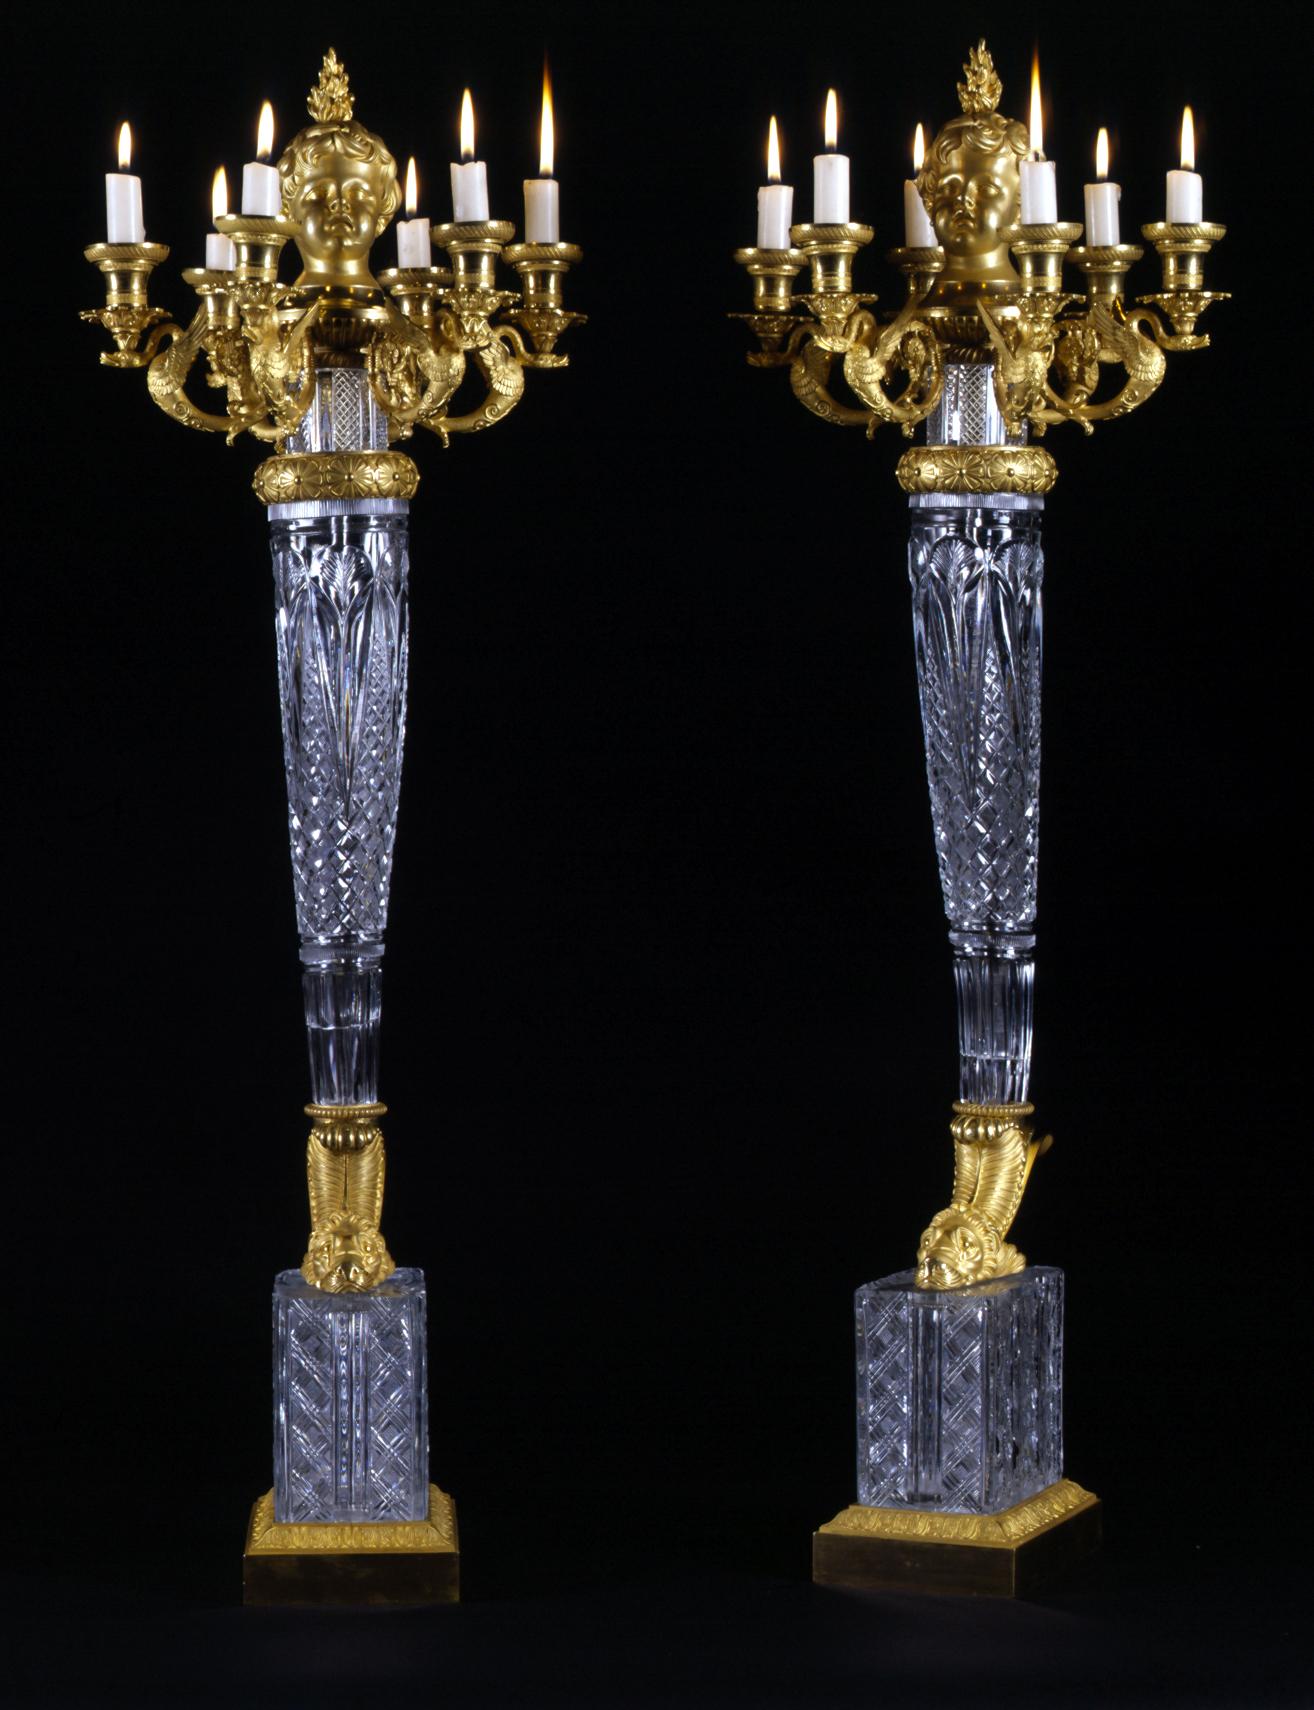 A remarkable and highly important pair of Empire gilt-bronze and cut-crystal six-light candelabra attributed to Escalier De Cristal De Paris.

French, circa 1819.

This exceptional pair of candelabra can almost certainly be attributed to the